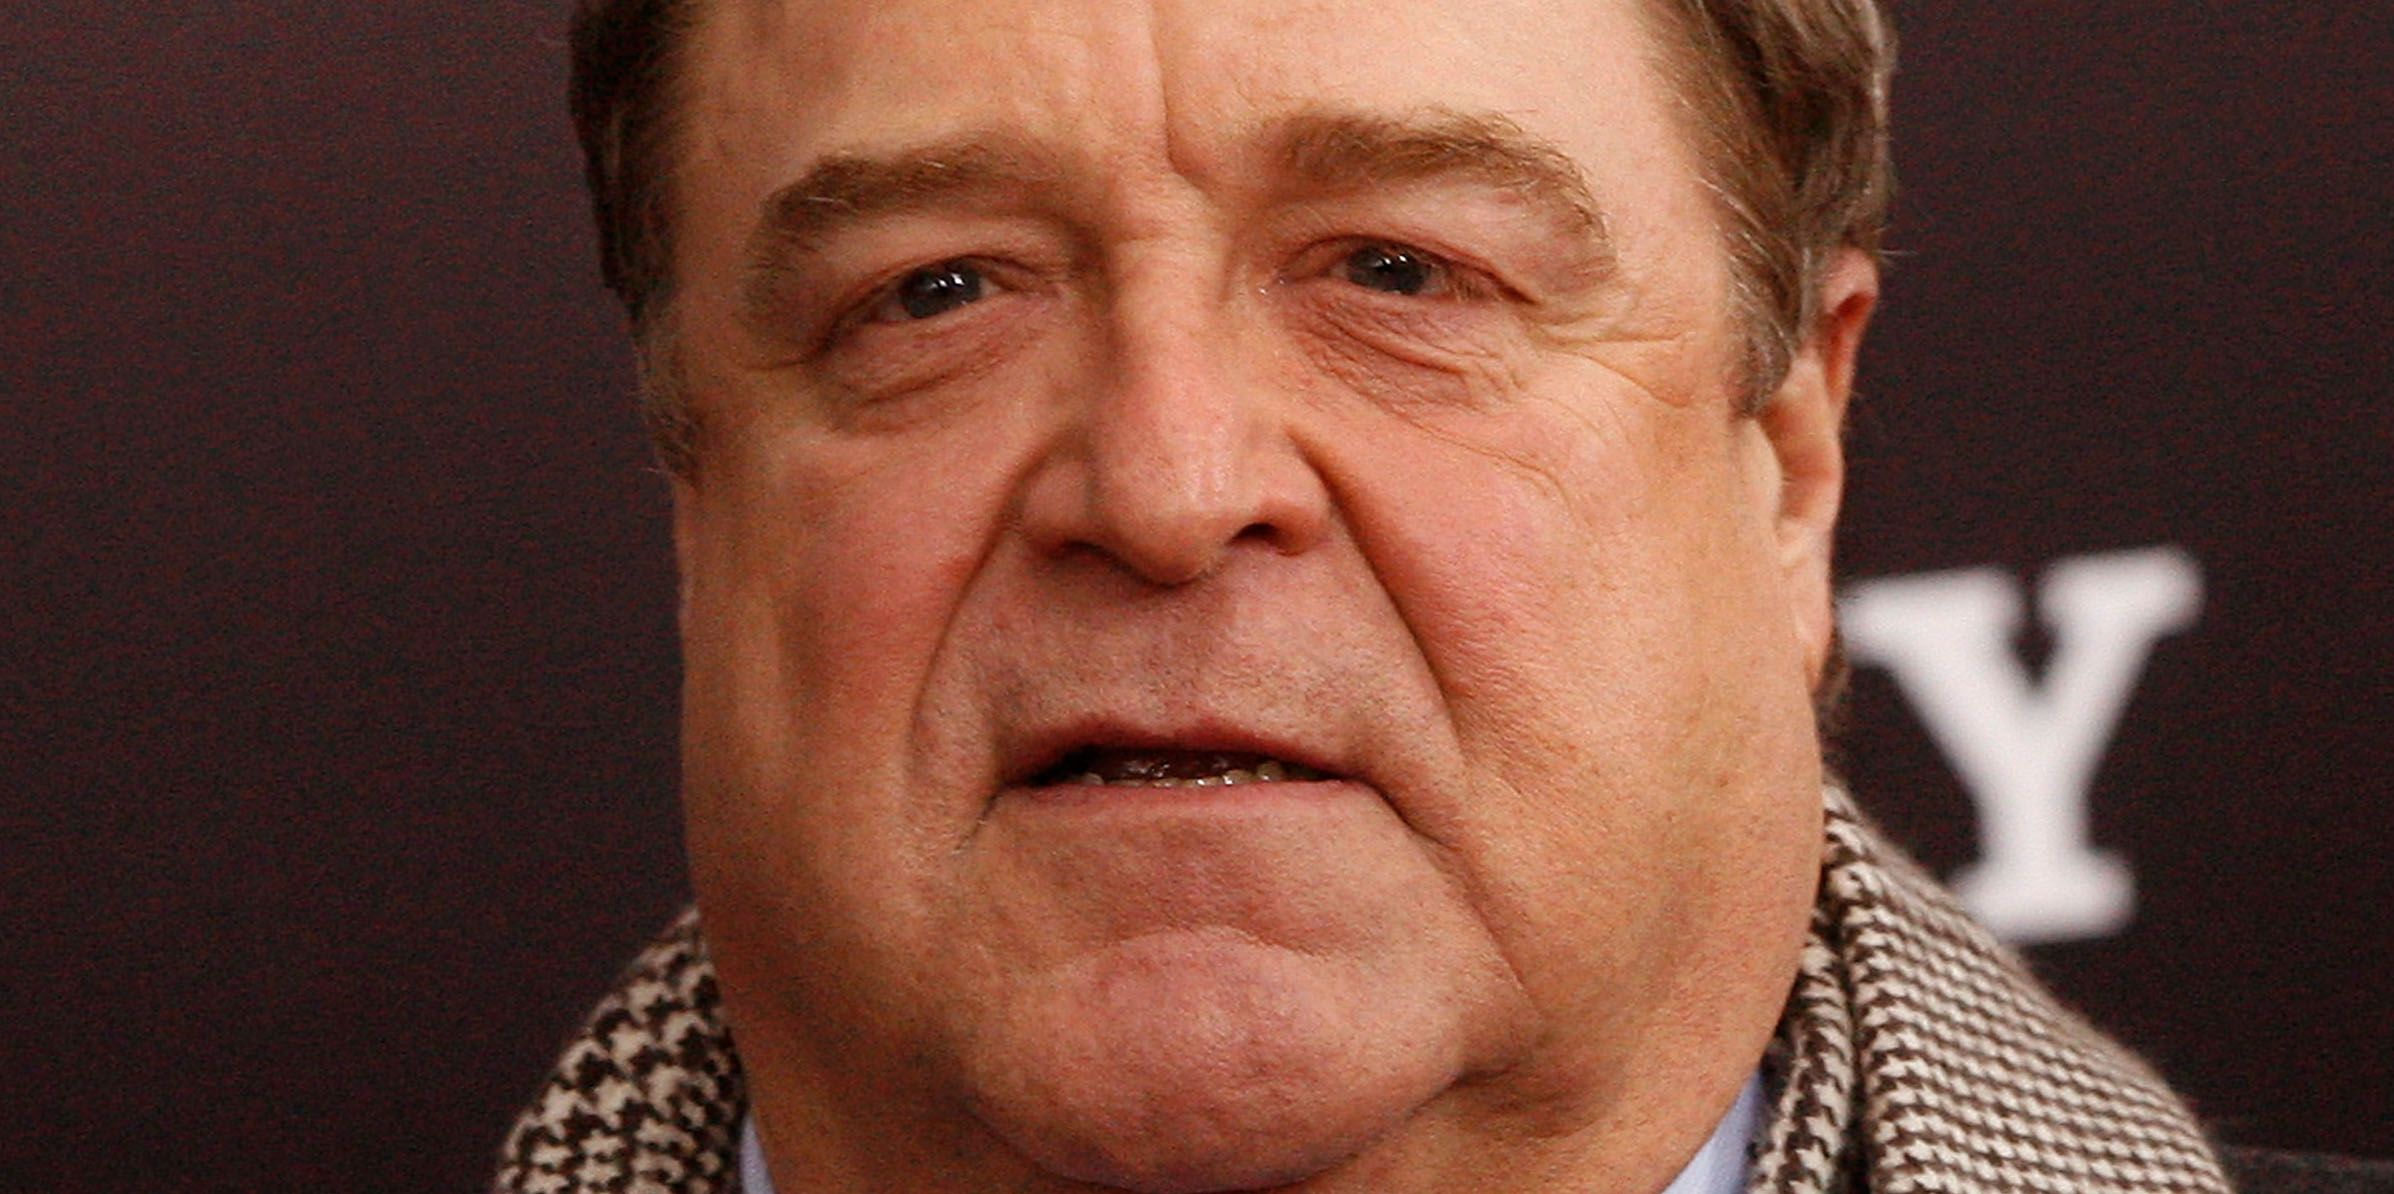 John Goodman Looks Unrecognizable as He Shows off Weight Loss